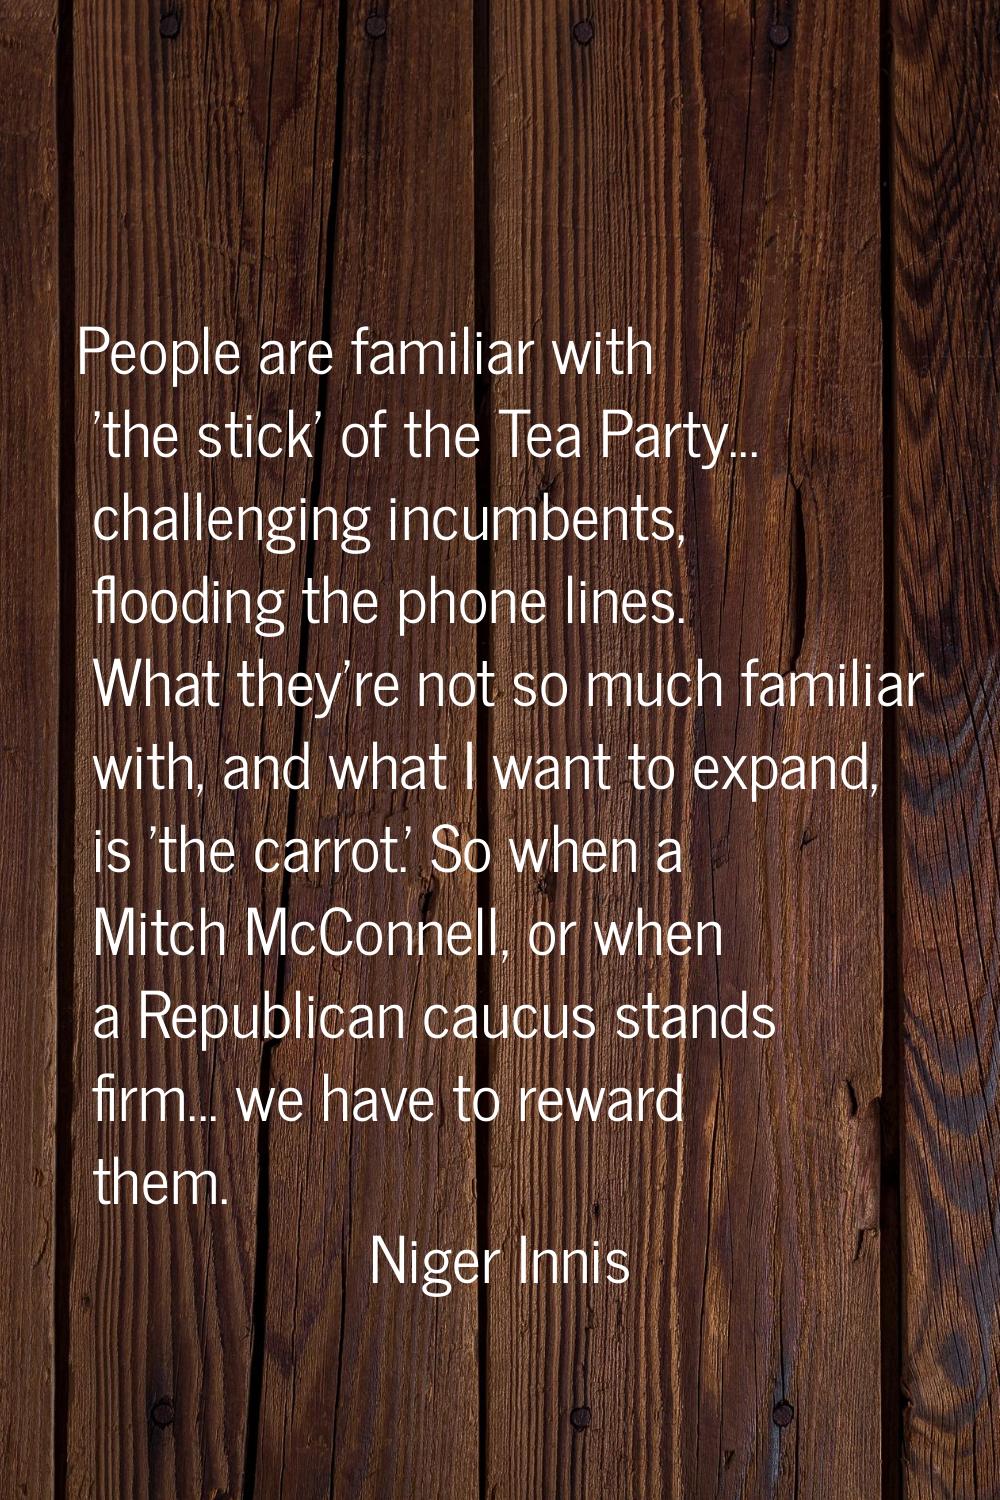 People are familiar with 'the stick' of the Tea Party... challenging incumbents, flooding the phone